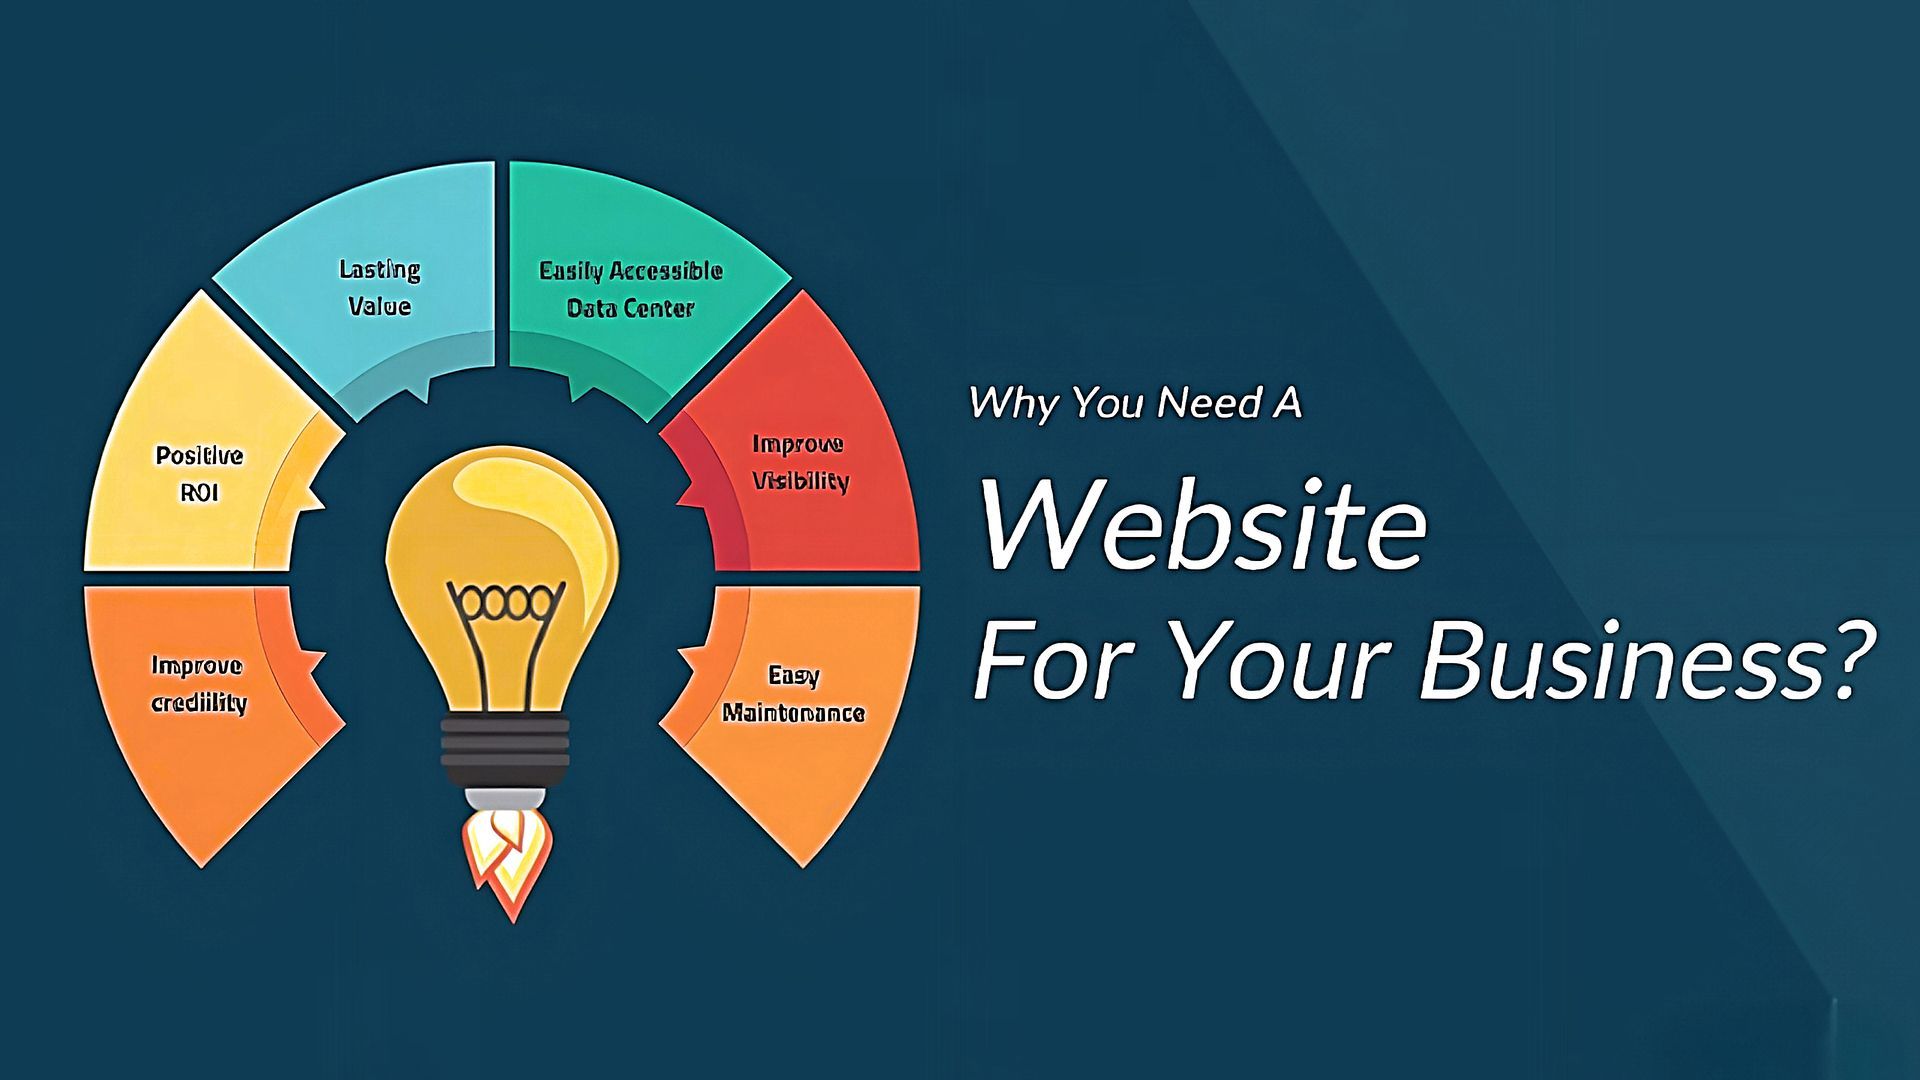 why you need a website for your business image